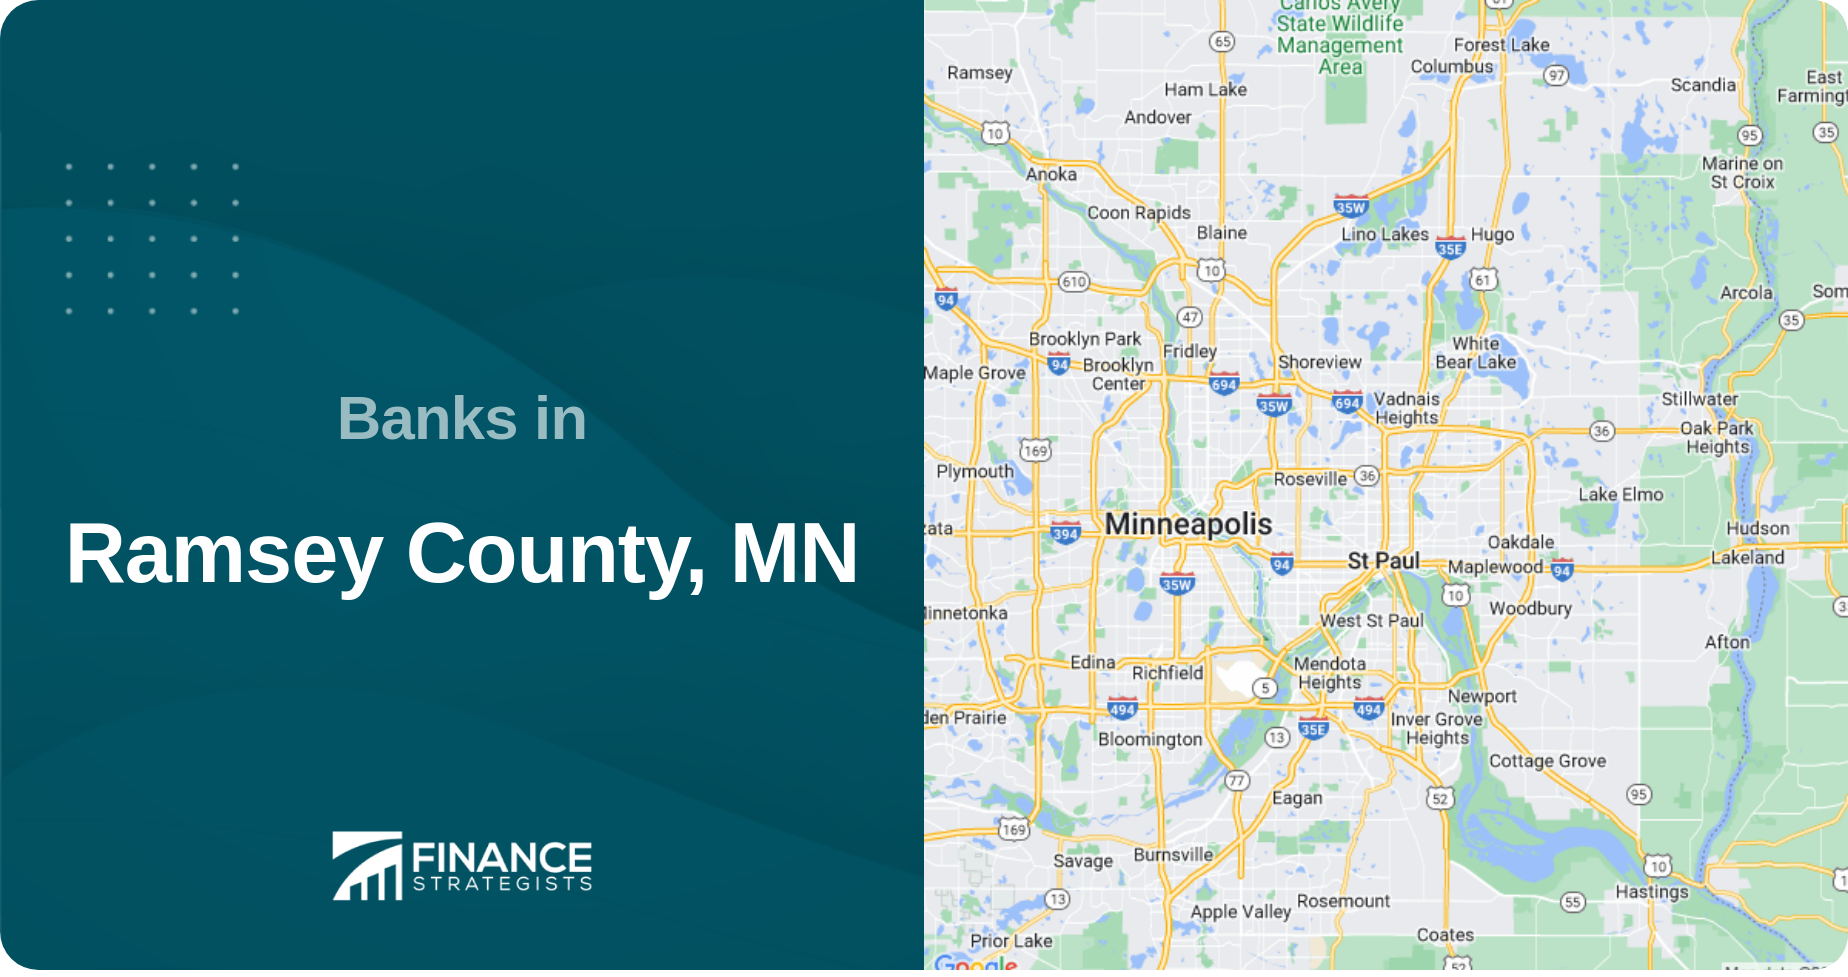 Banks in Ramsey County, MN